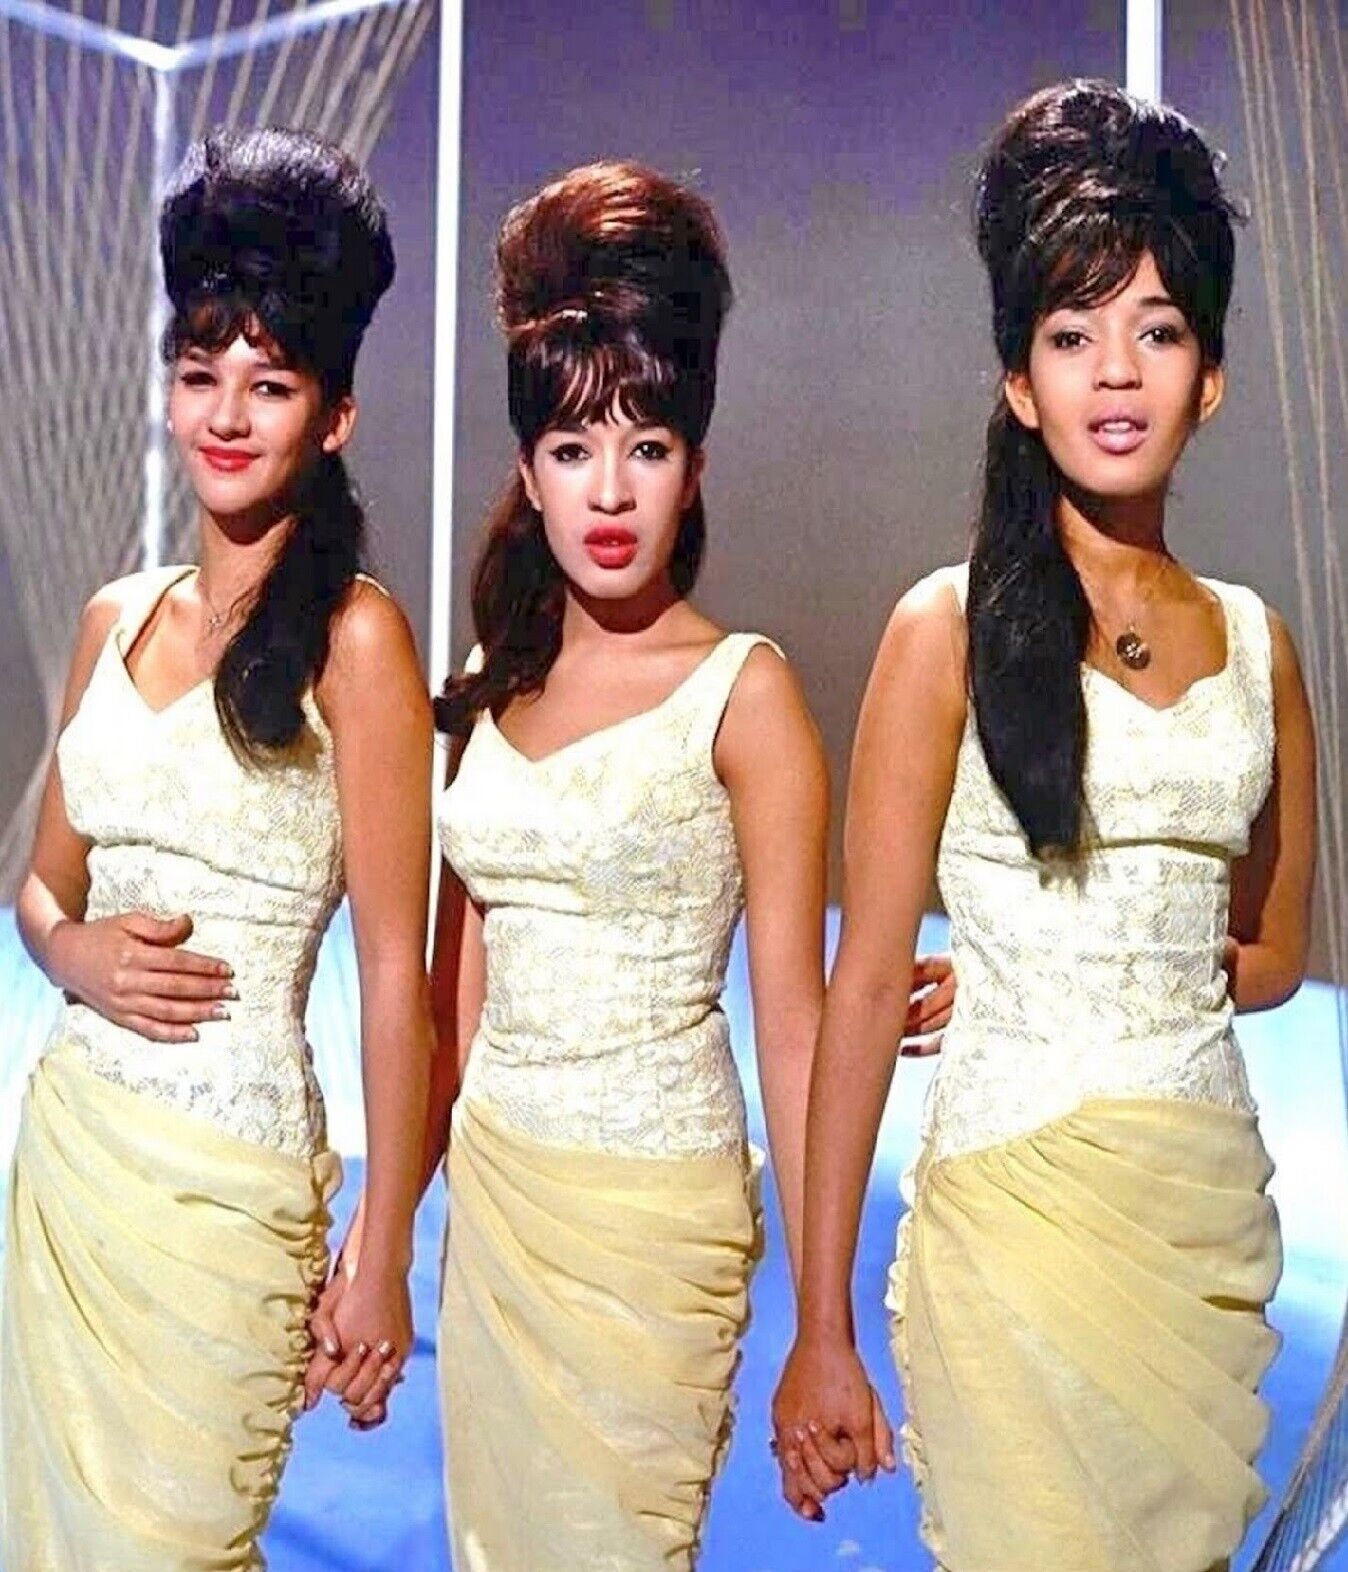 Ronnie Spector &The Ronettes Retro Girl Band Picture Poster Photo Print 8x10